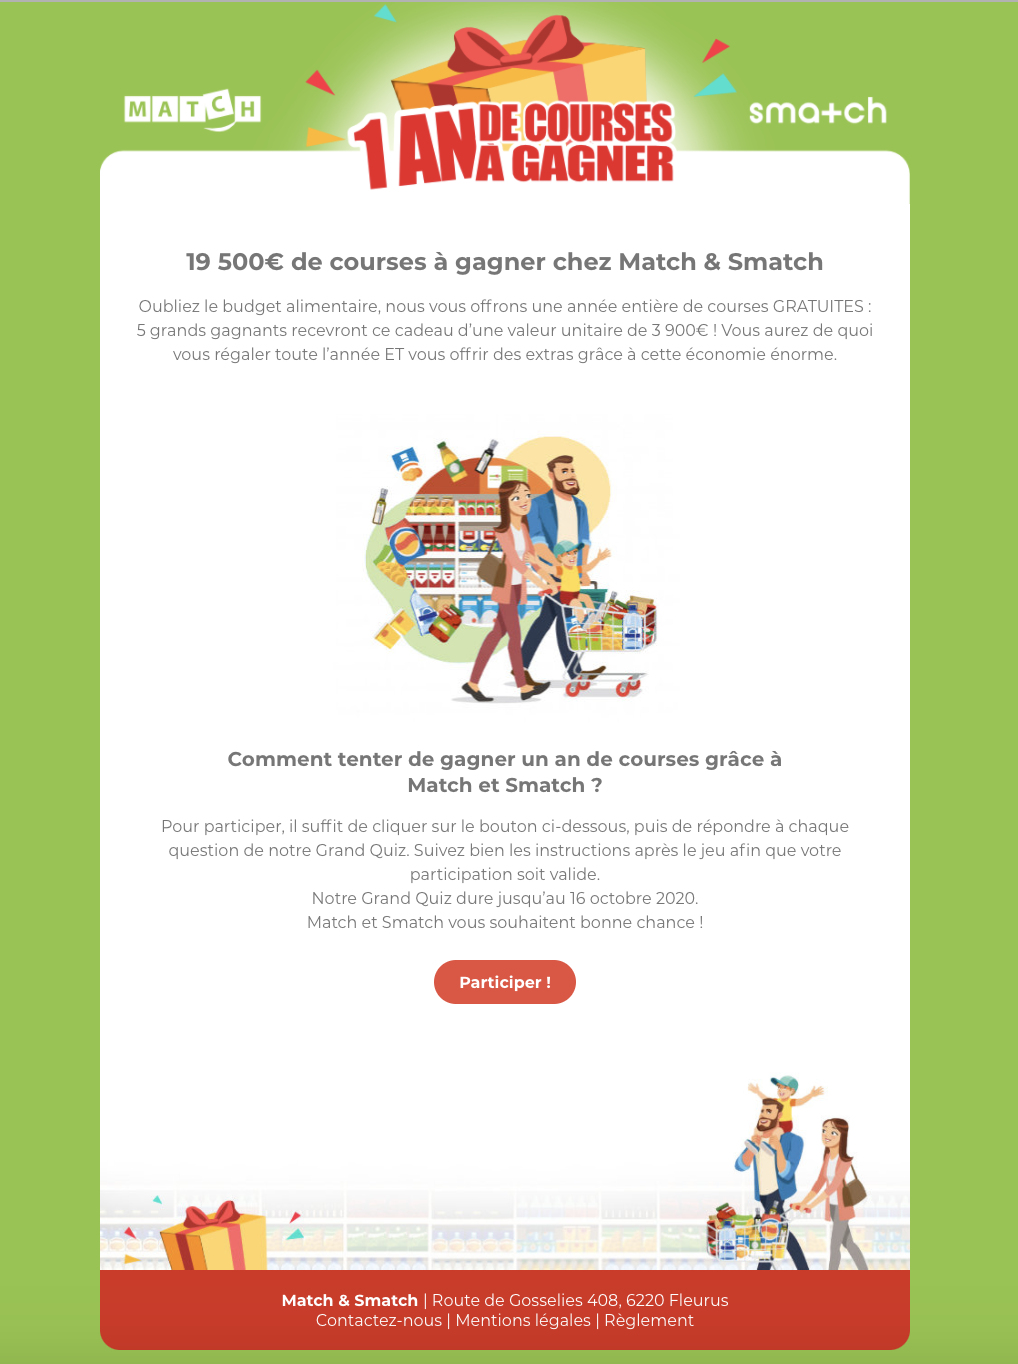 favourite-interactive-marketing-campaigns-october-match-smatch-2